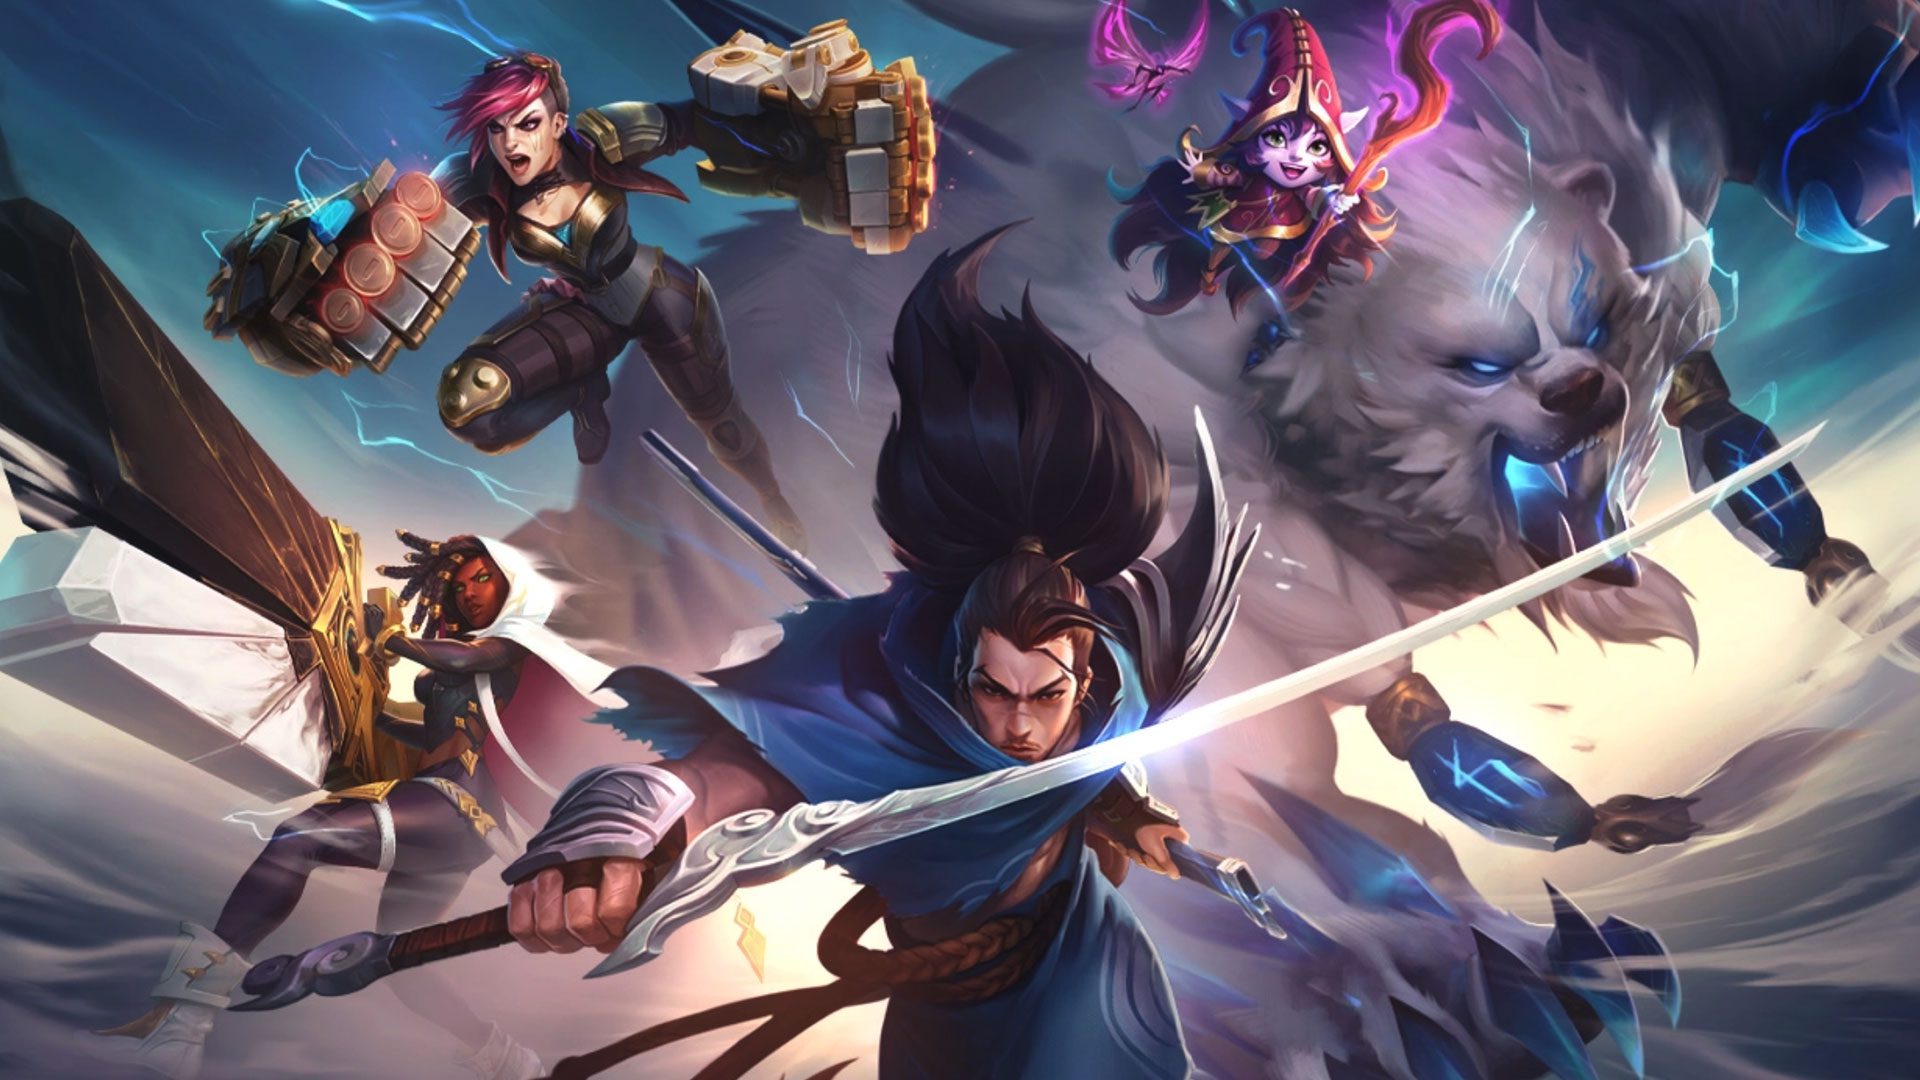 Is League of Legends an MMO?